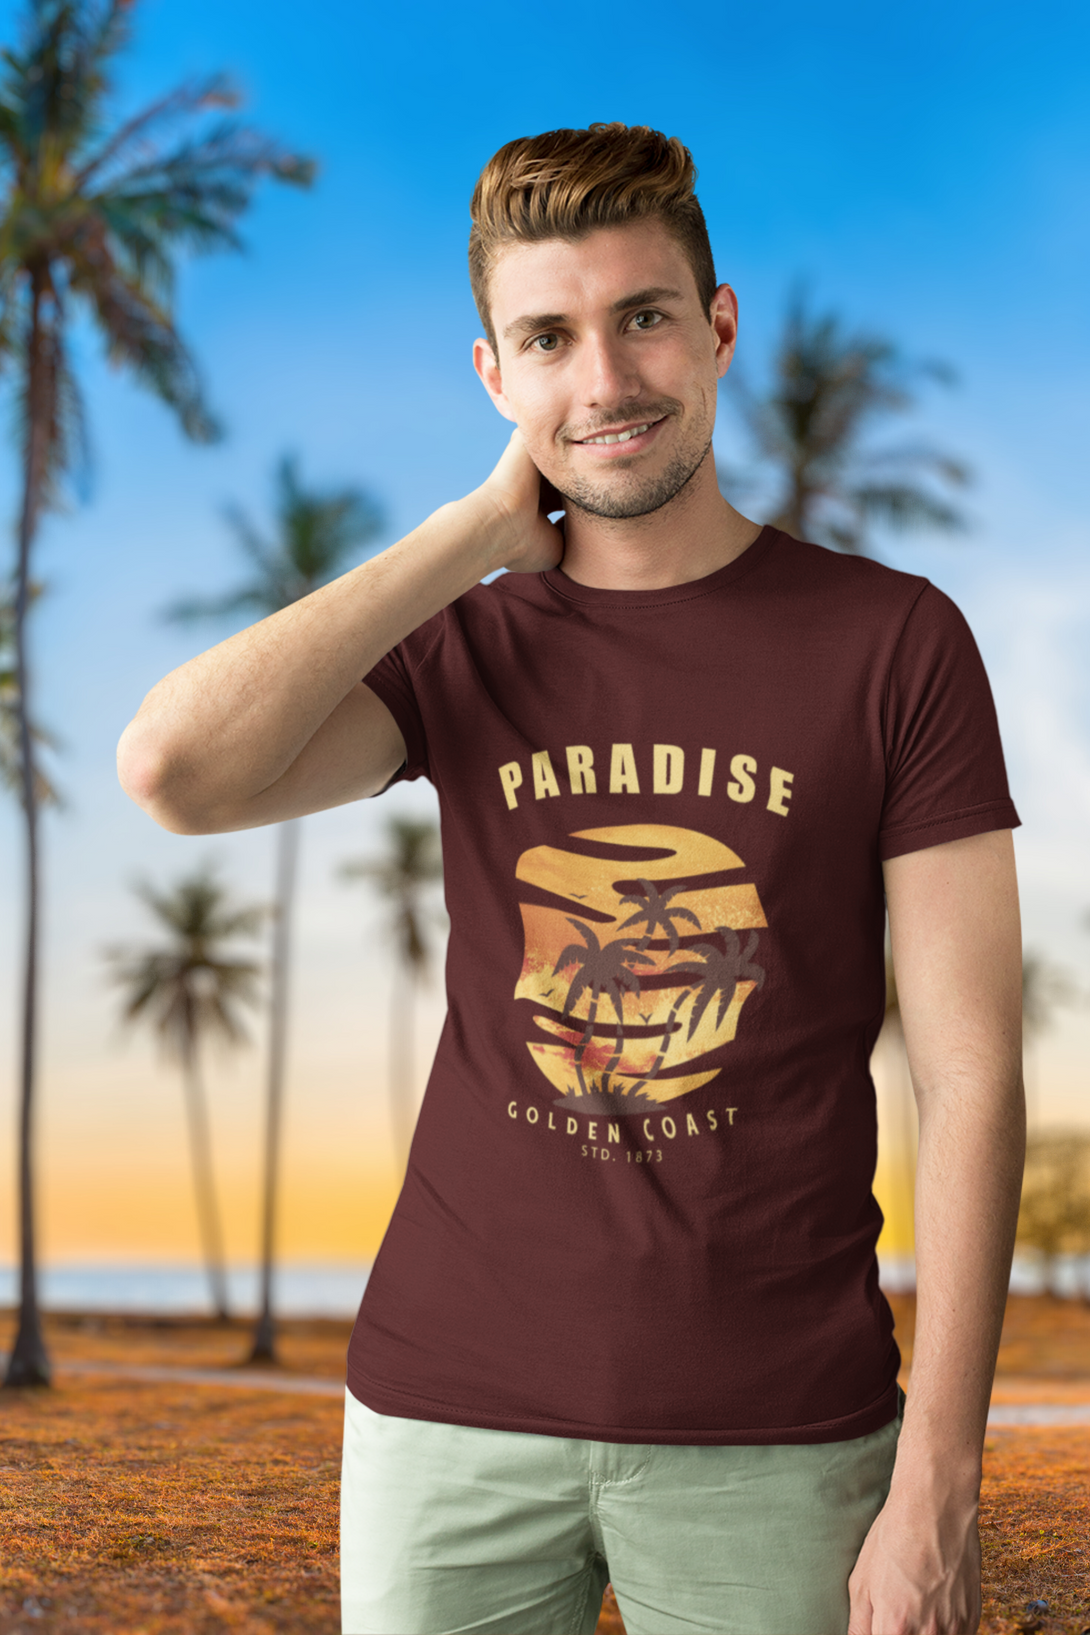 Tropical Paradise Printed T-Shirt For Men - WowWaves - 2